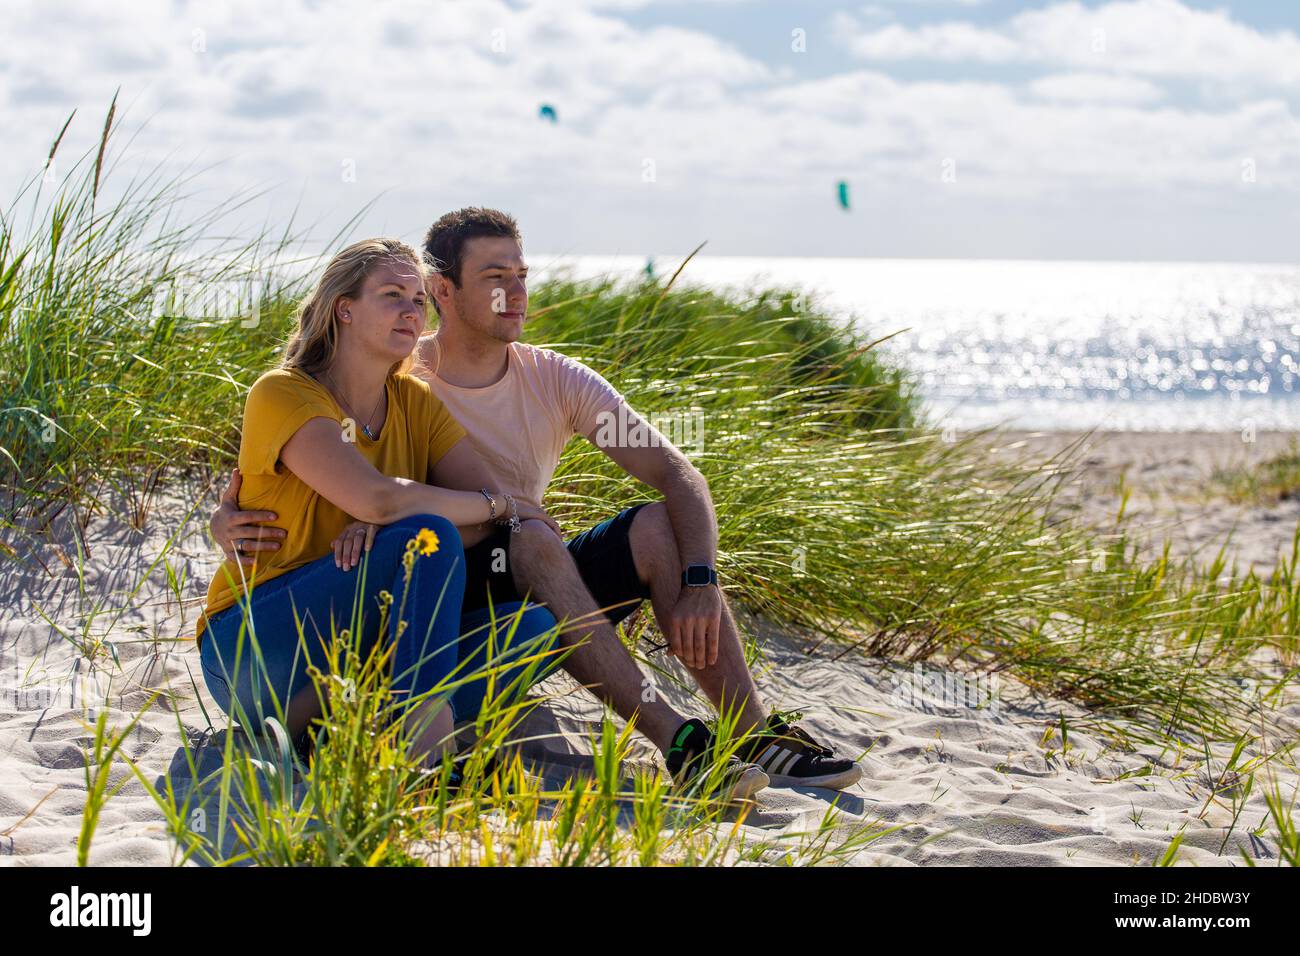 Junges Paar am Strand in Schillig, 30, Jahre, MR:Yes Foto Stock